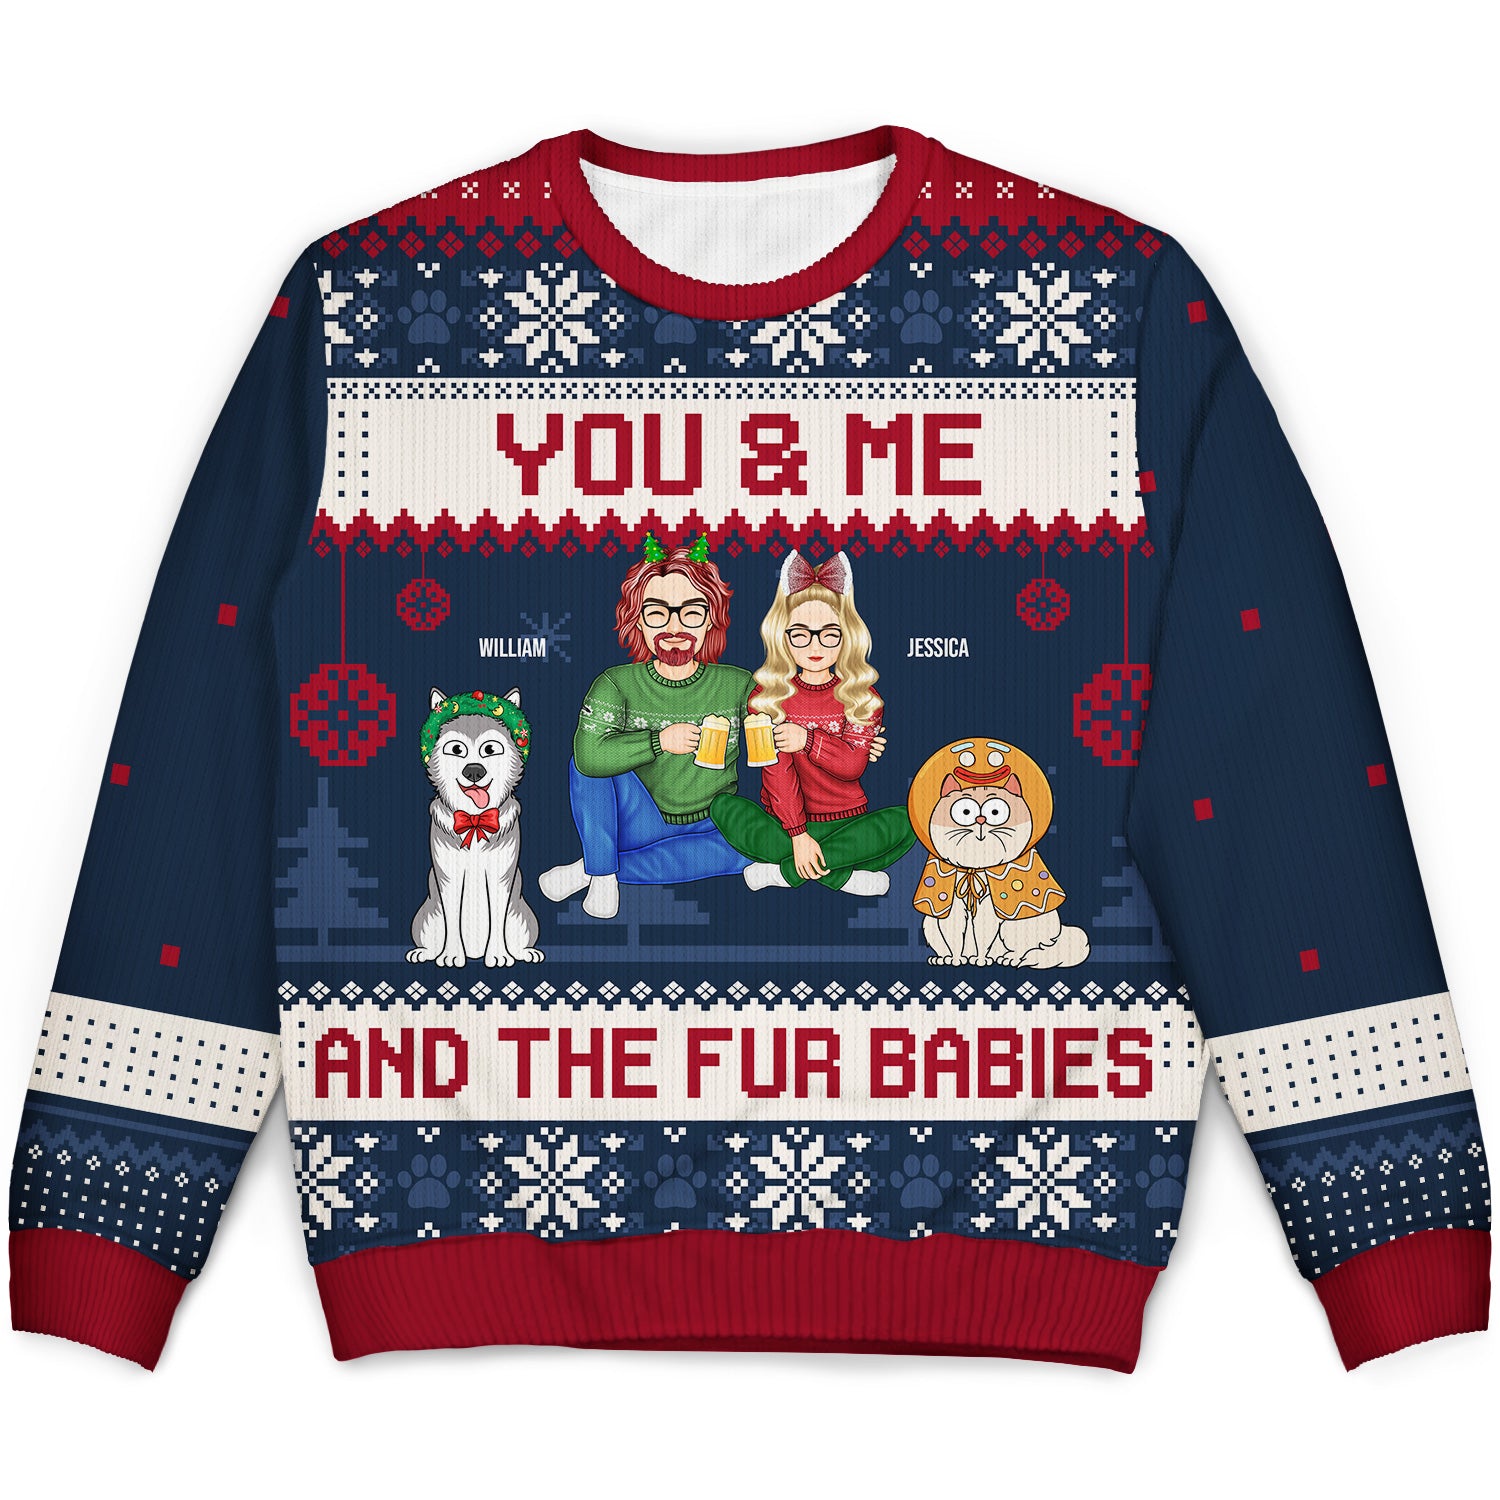 Couple You & Me And The Fur Babies Cartoon Style - Christmas Gift For Pet Lovers, Dog Lovers, Cat Lovers - Personalized Unisex Ugly Sweater